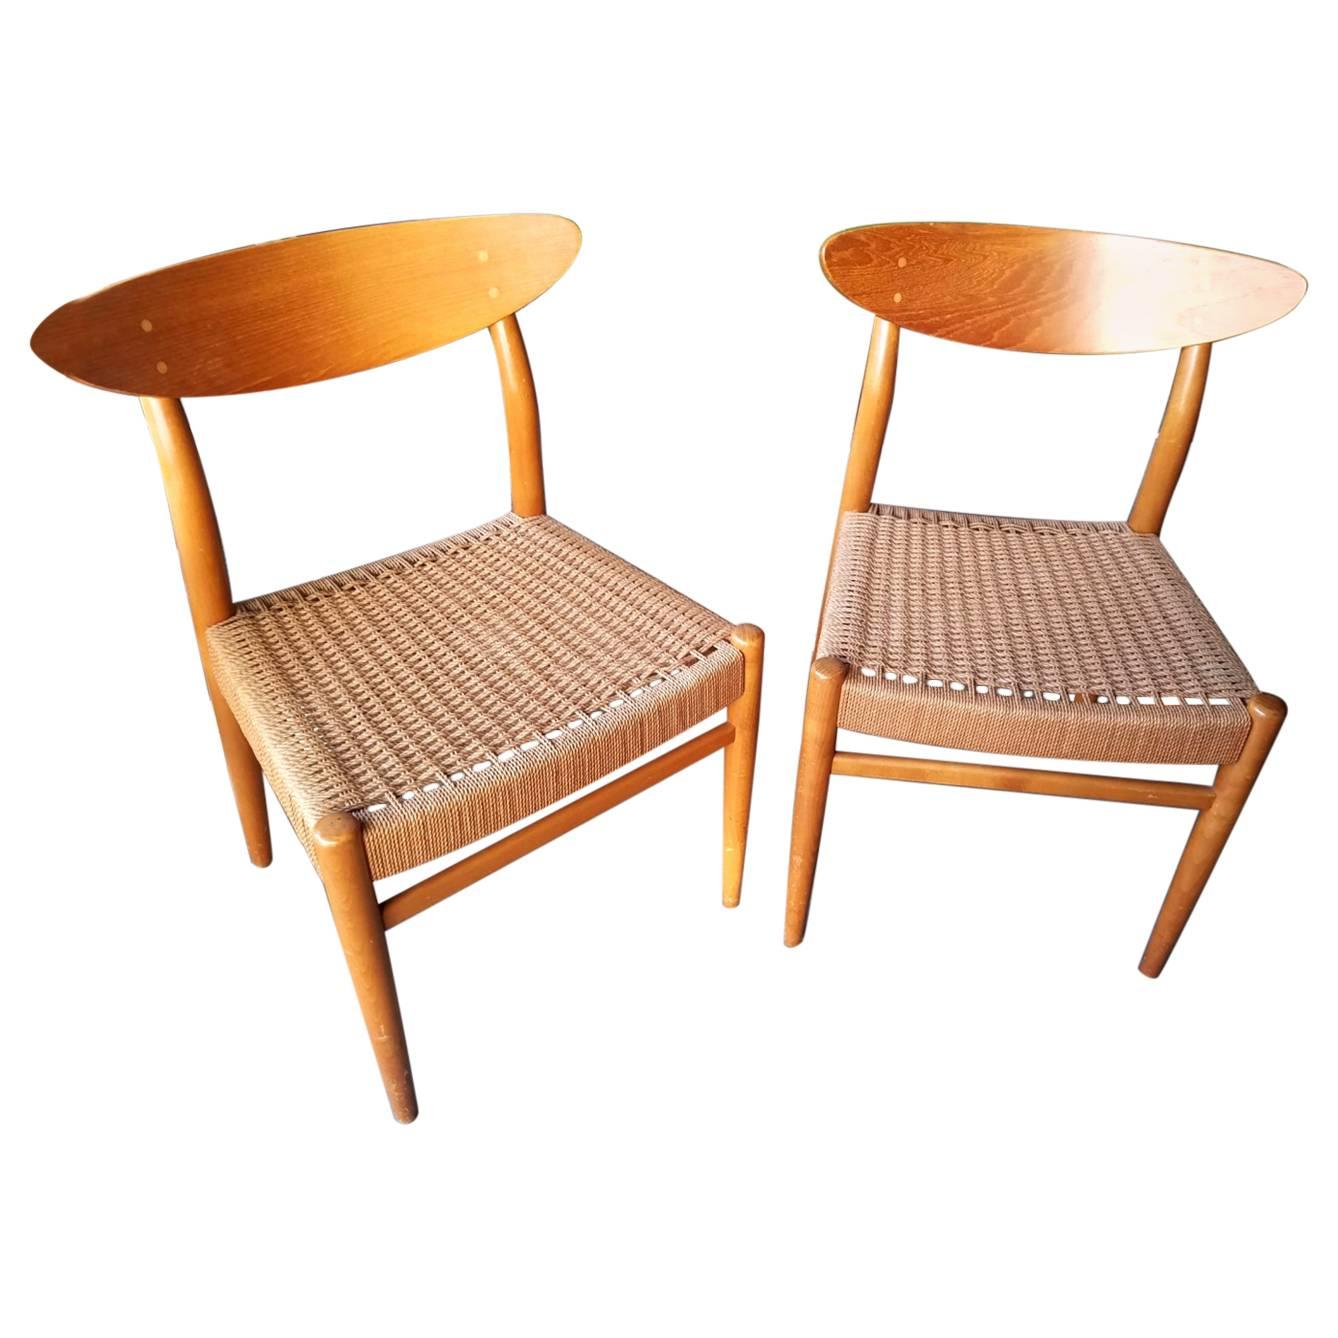 Two Dining Room Tabel Rope Chairs Designed by Poul Volther for Frem Rojle For Sale